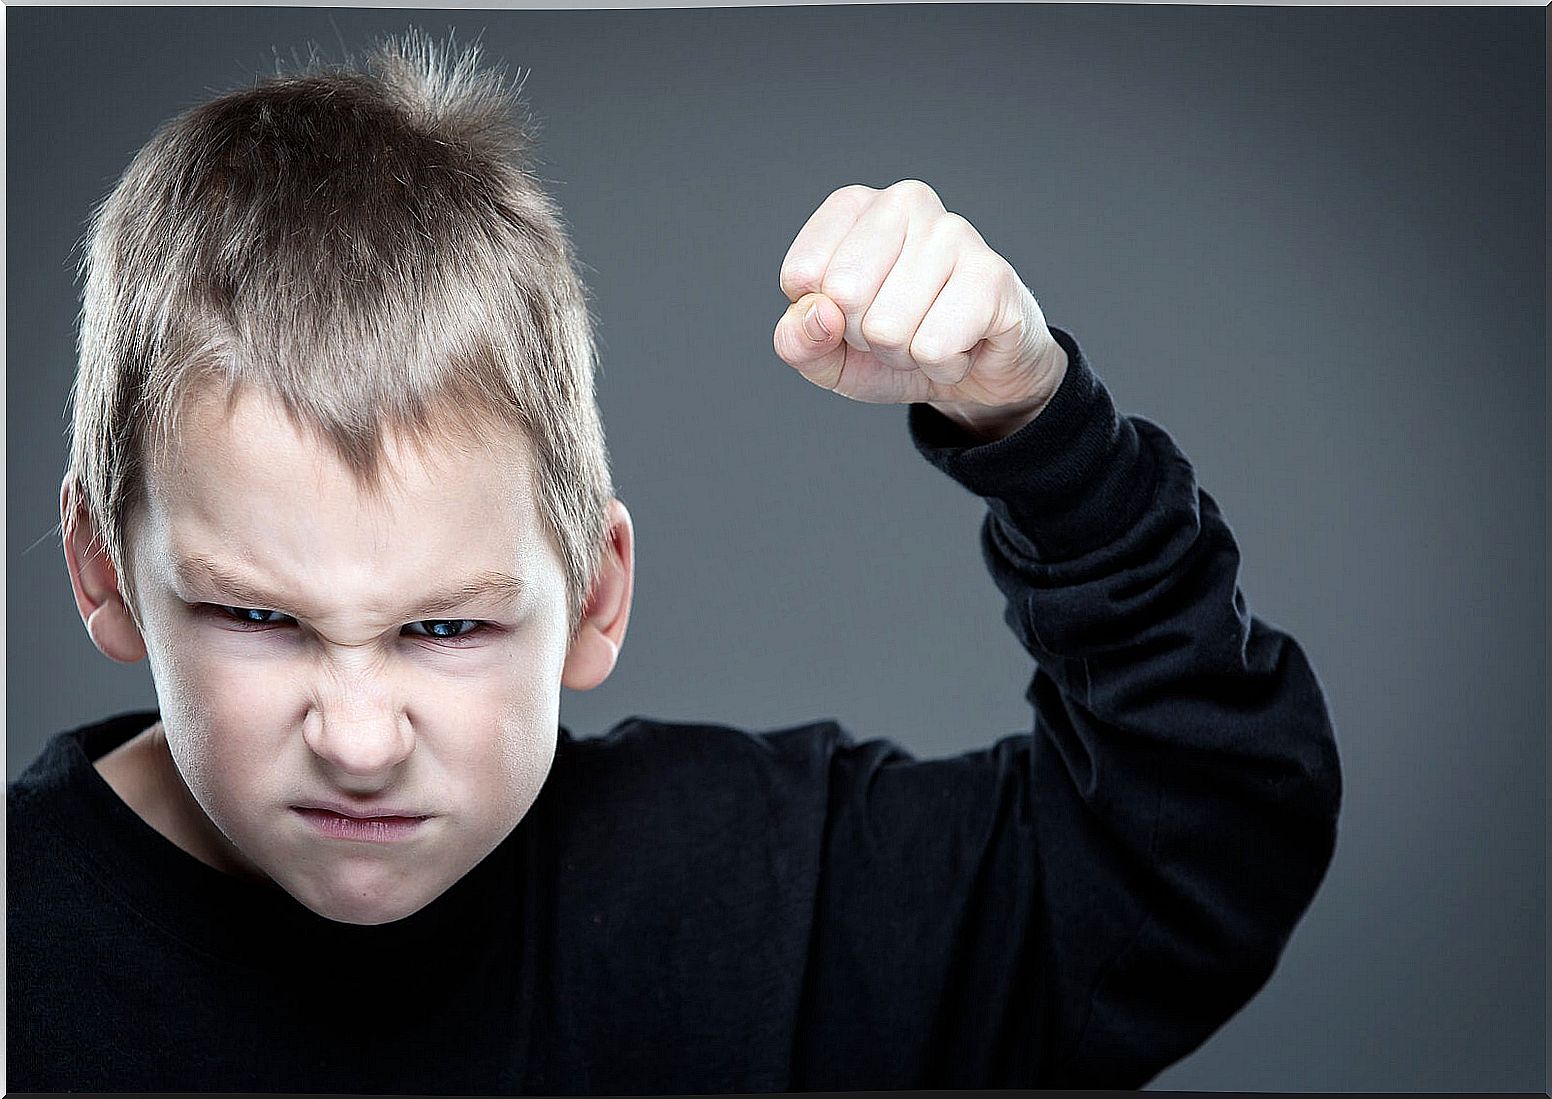 Child with raised fist ready to hit due to negative modeling at home.